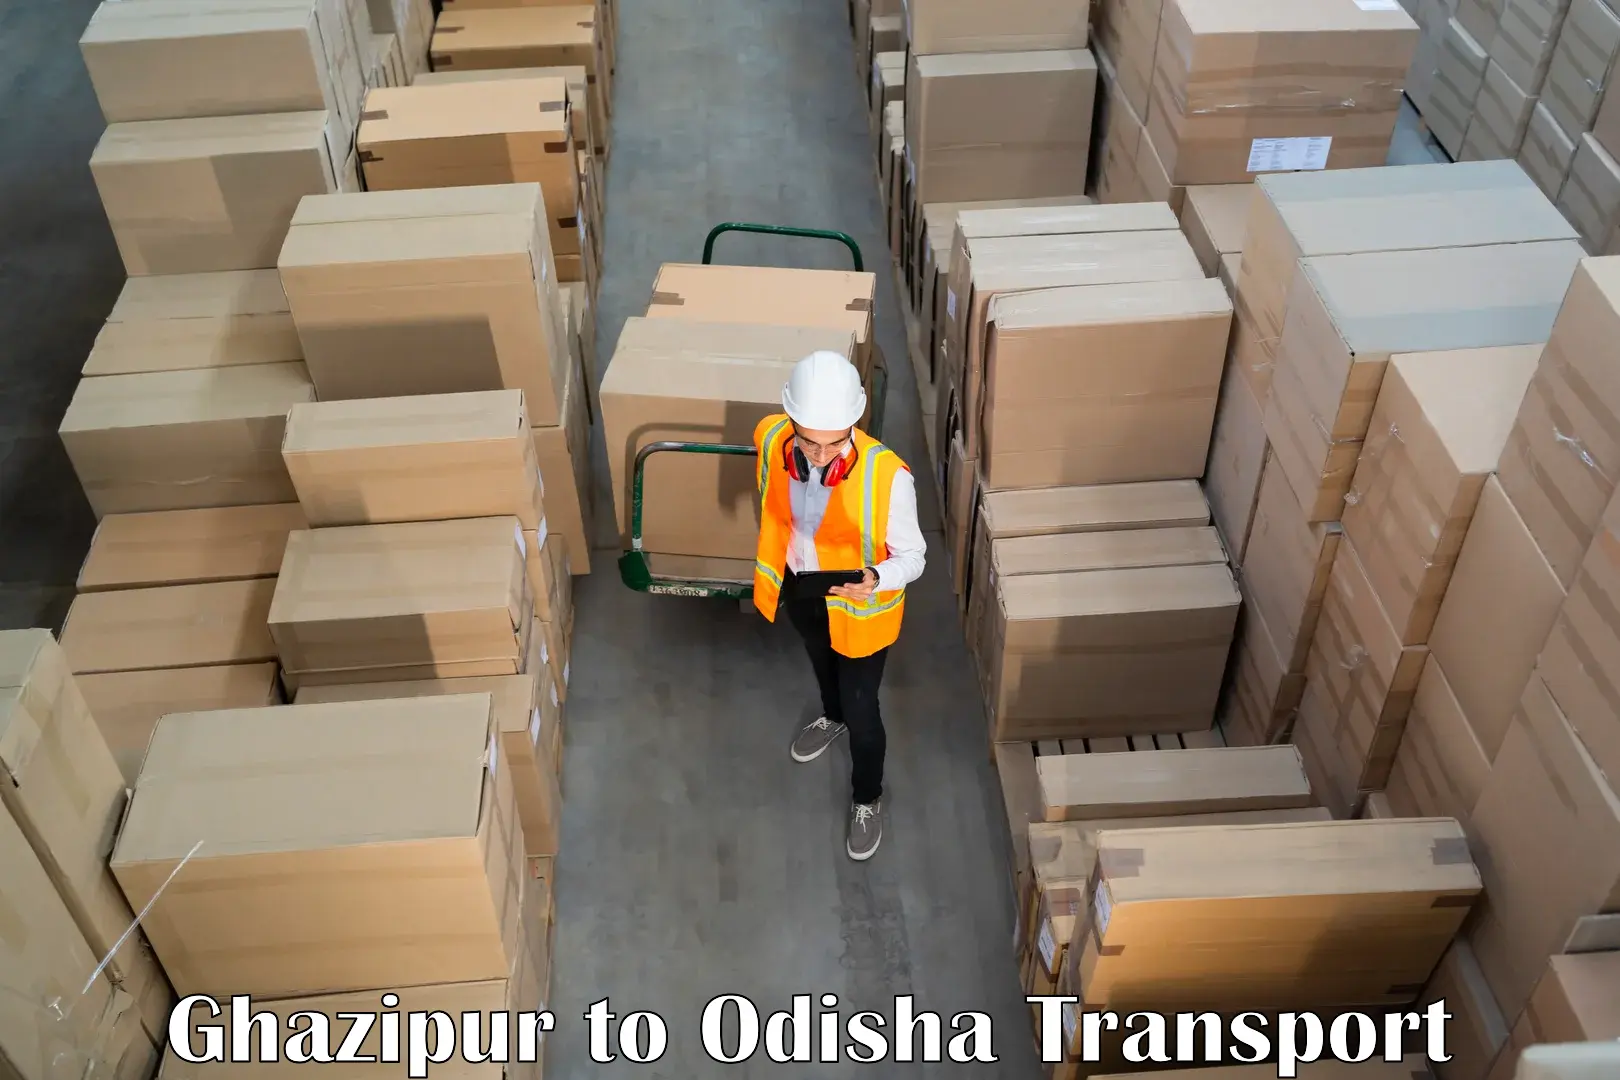 Delivery service Ghazipur to Khariaguda